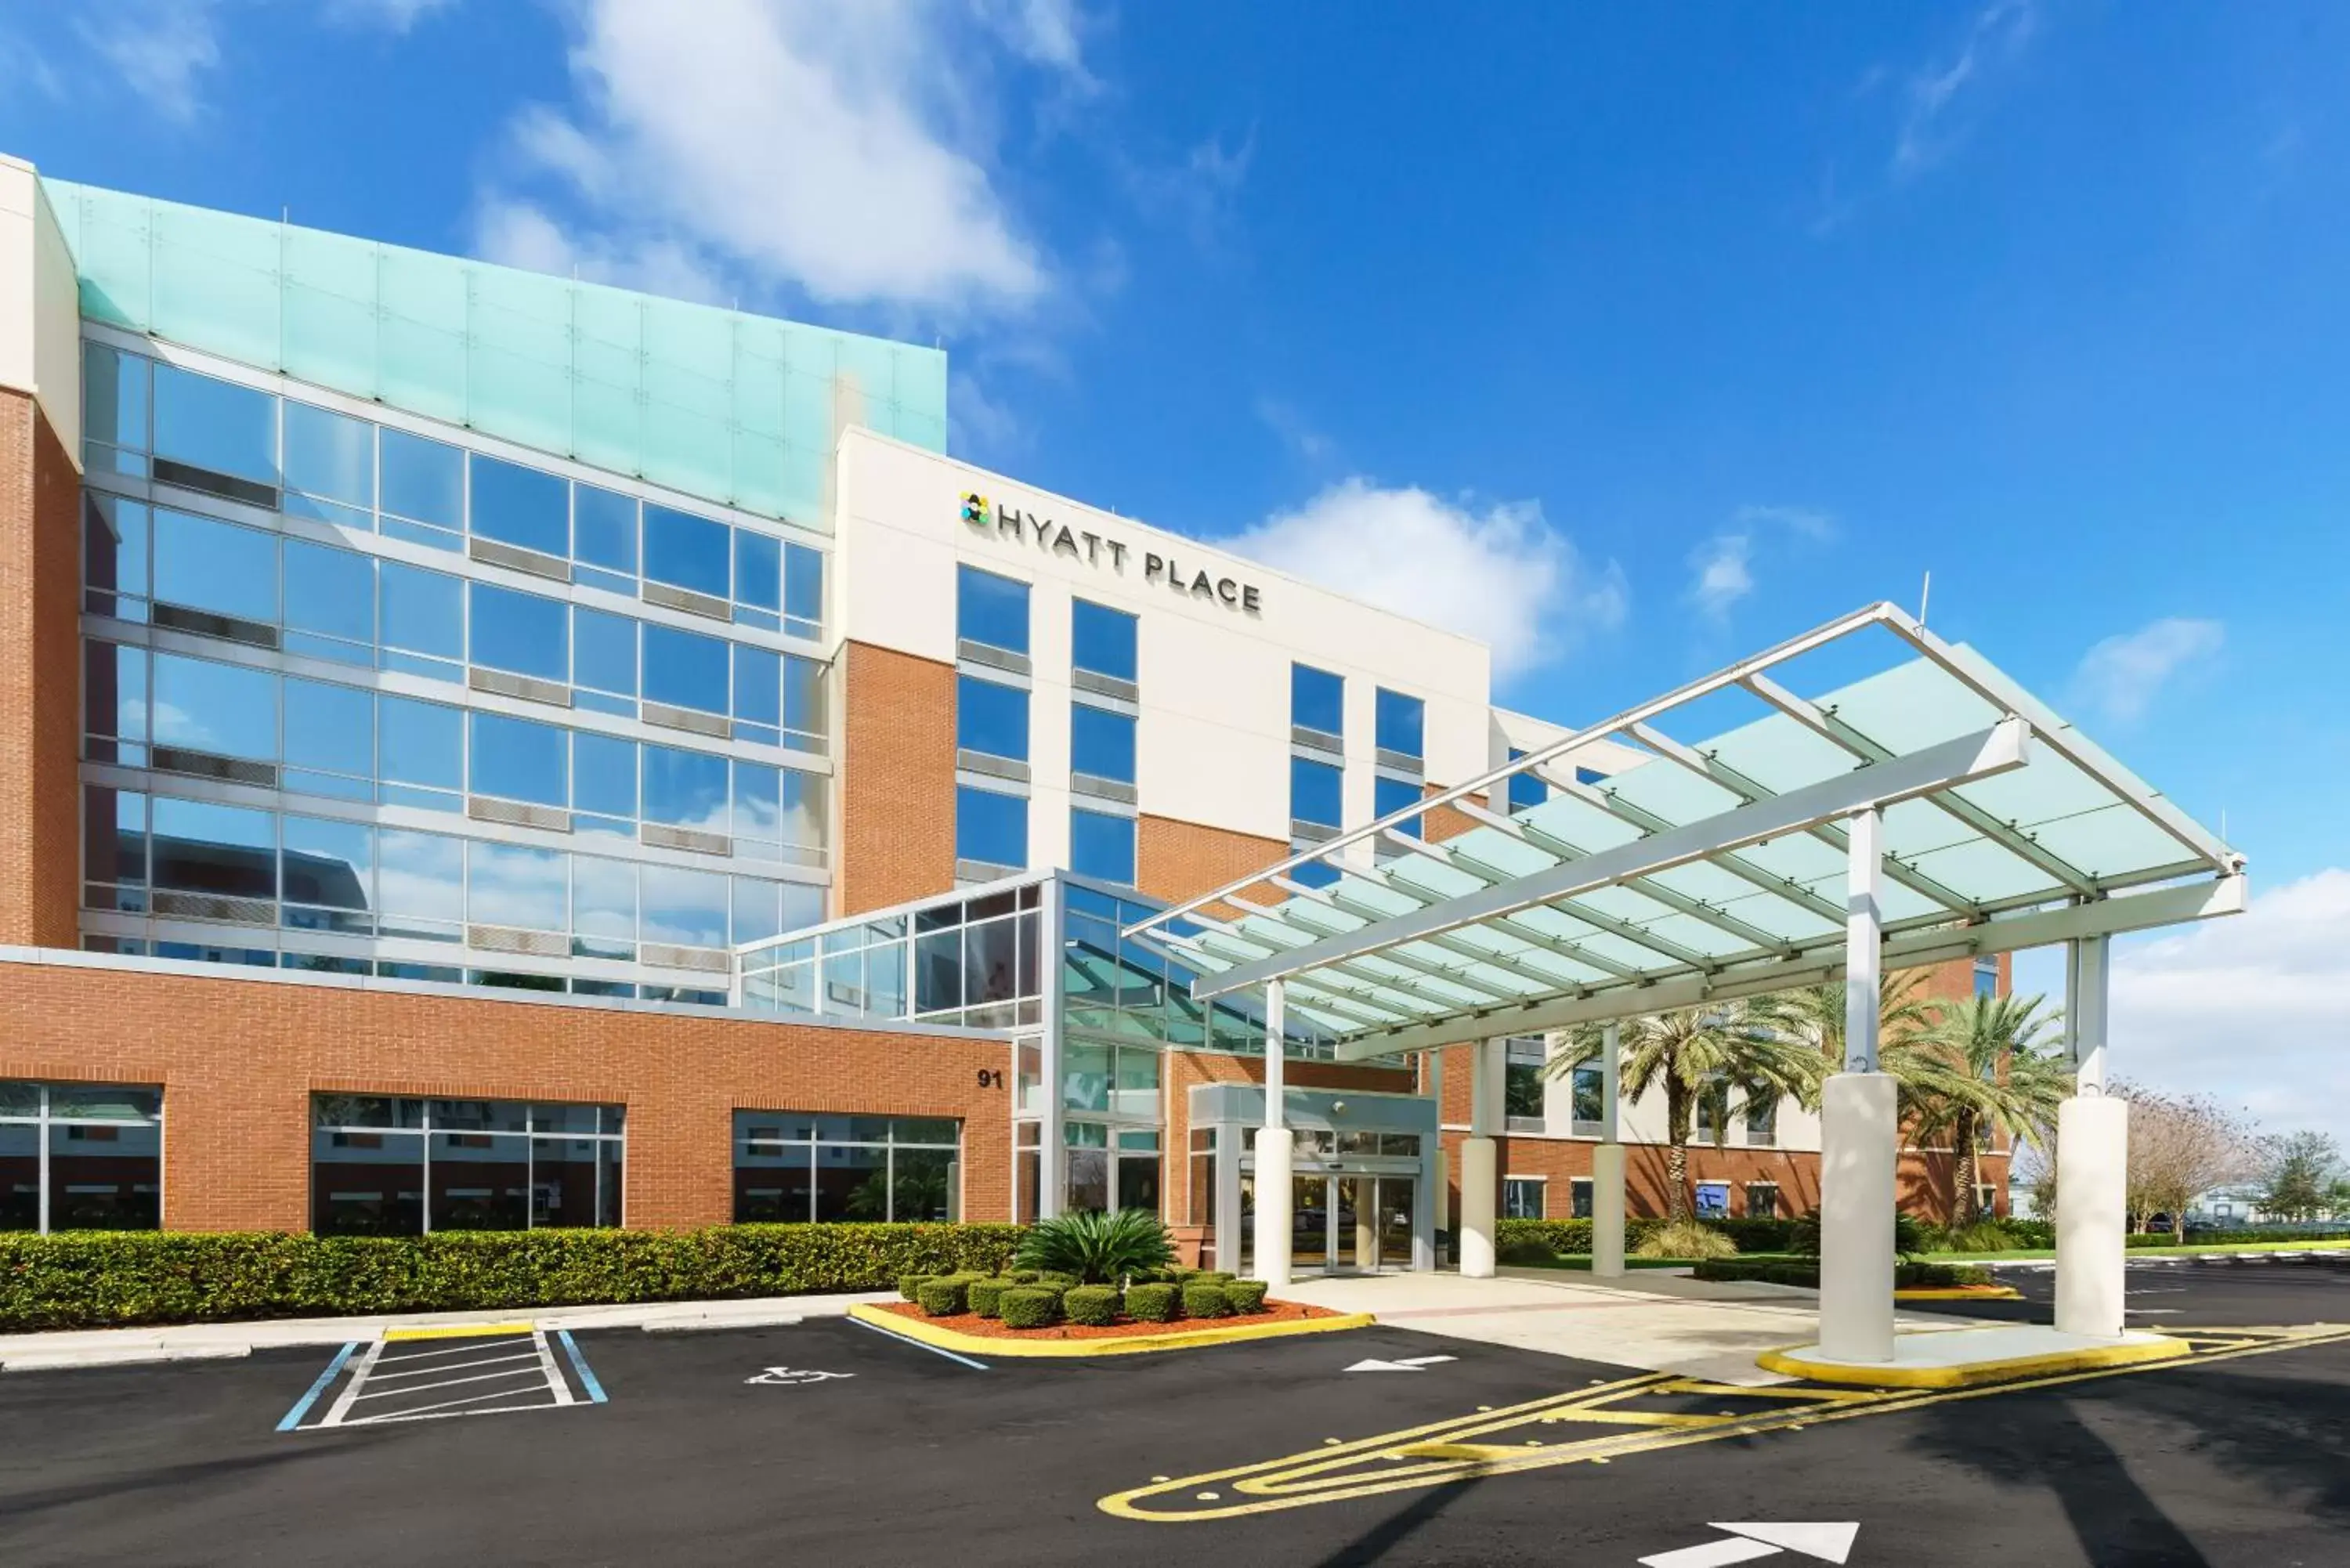 Property building in Hyatt Place Fort Lauderdale Airport/Cruise Port